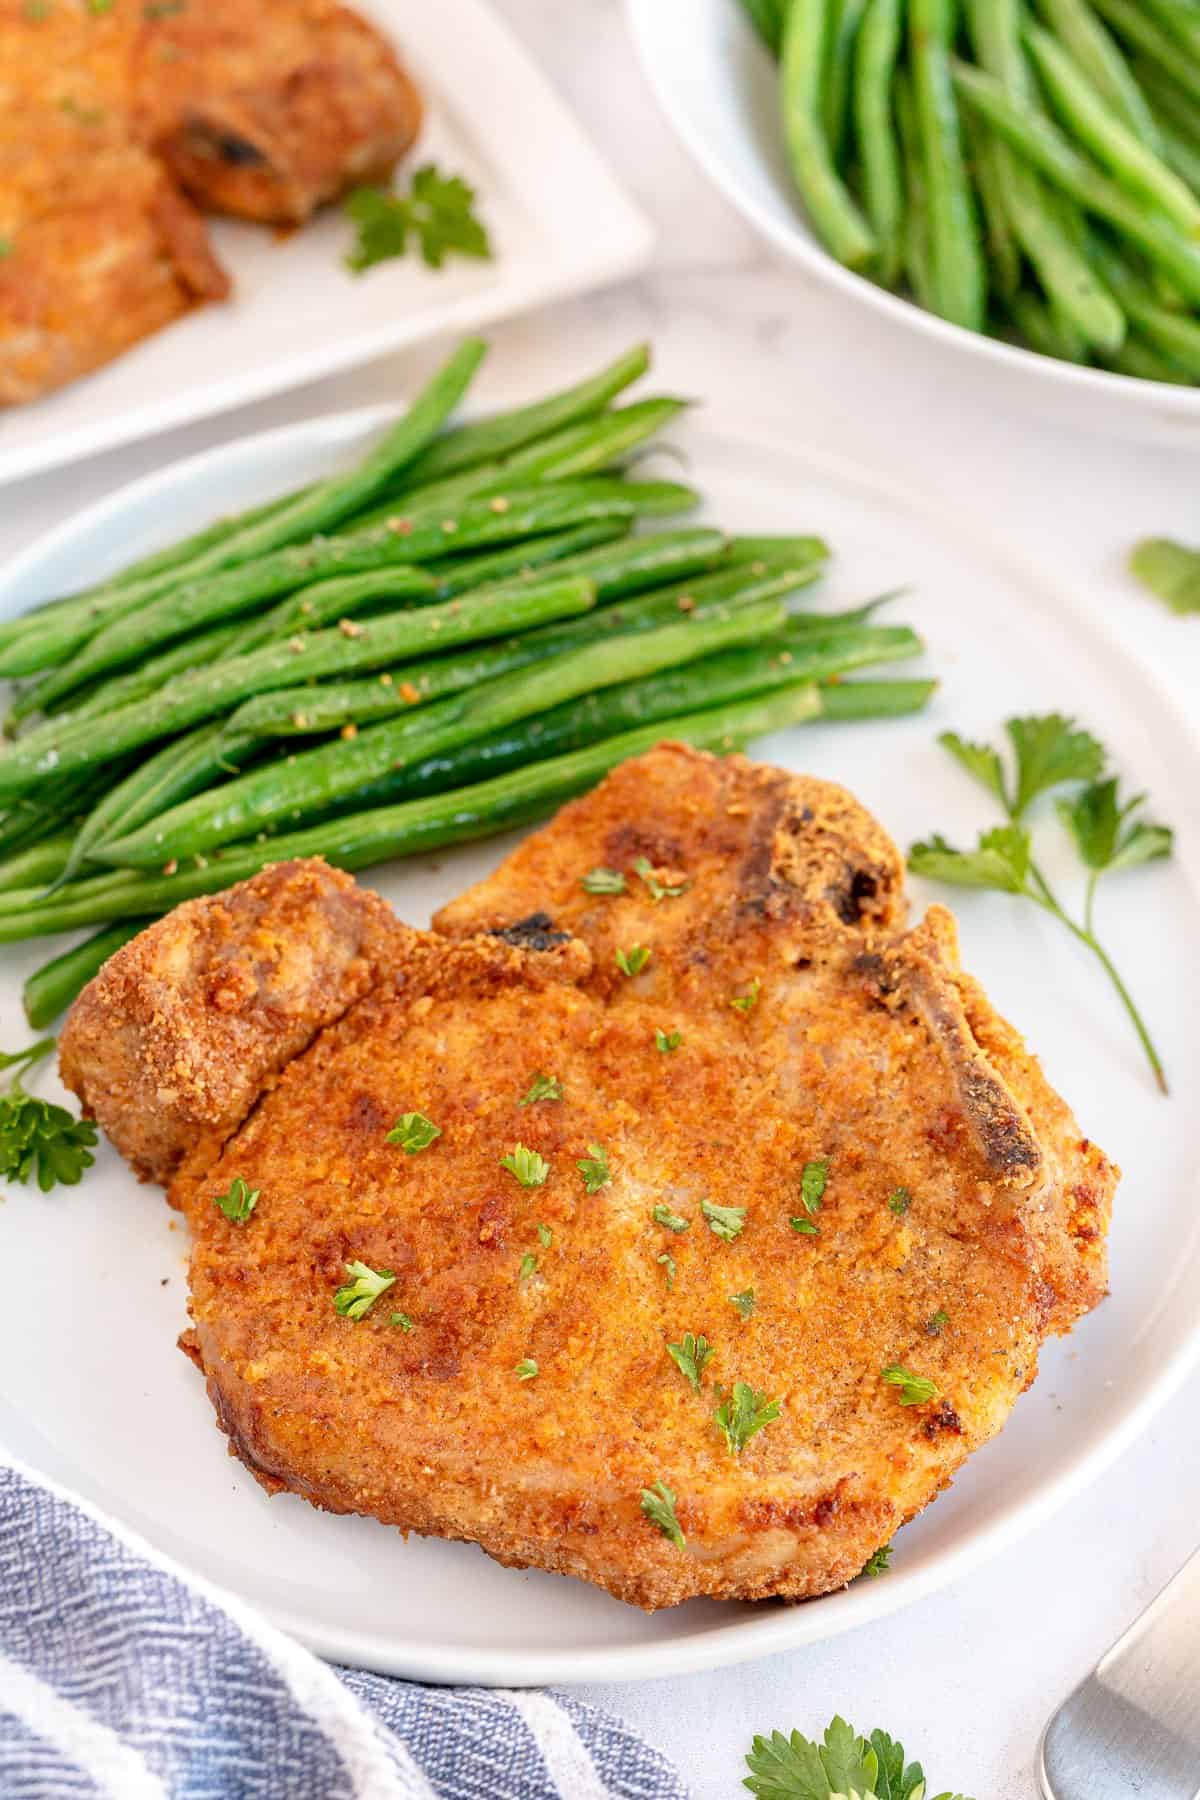 A breaded pork chop on a white plate with green beans.